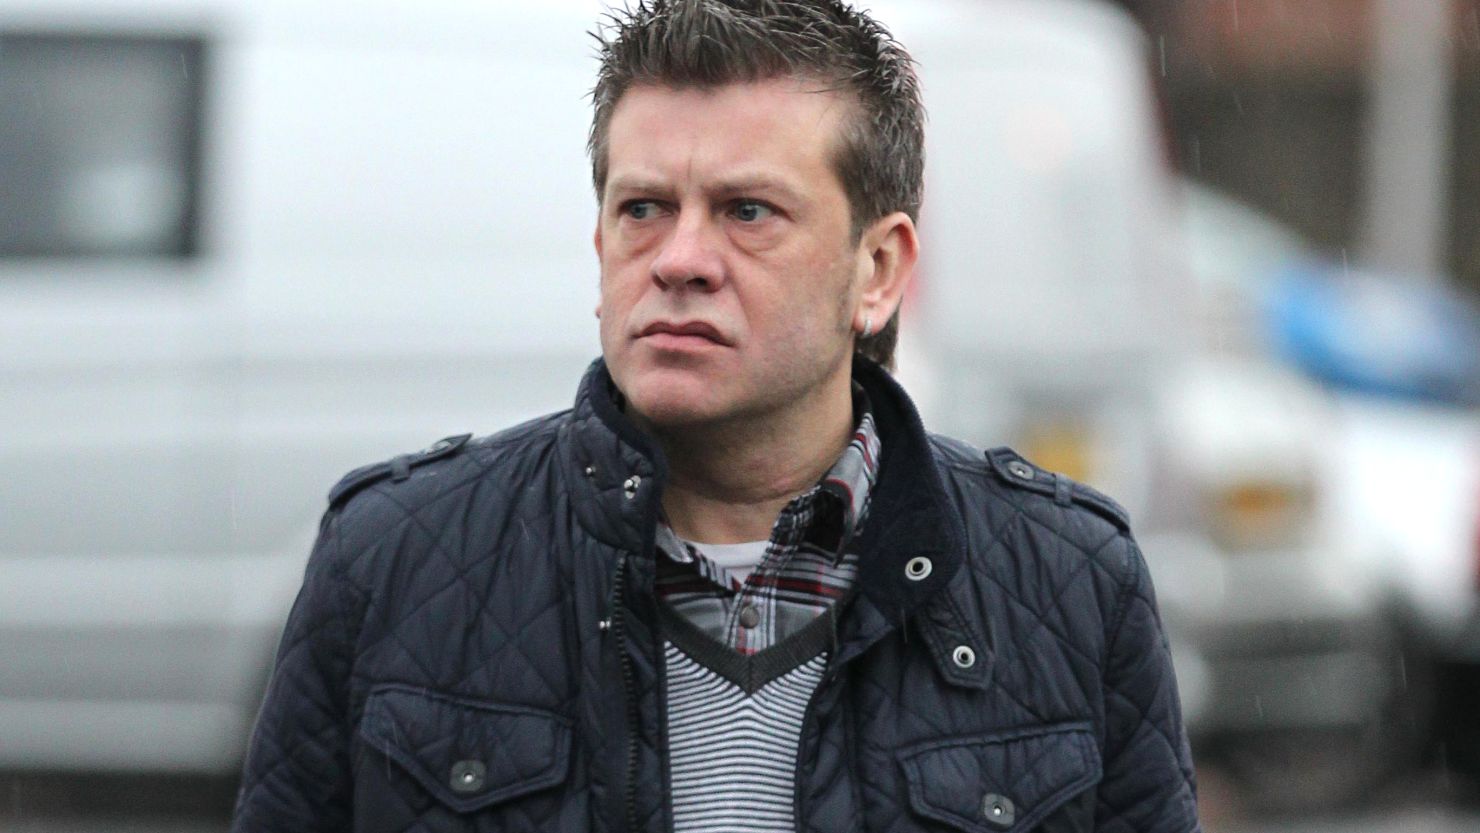 (File photo) Brian Shivers arrives at the Antrim Courthouse, Northern Ireland, on January 20, 2012.